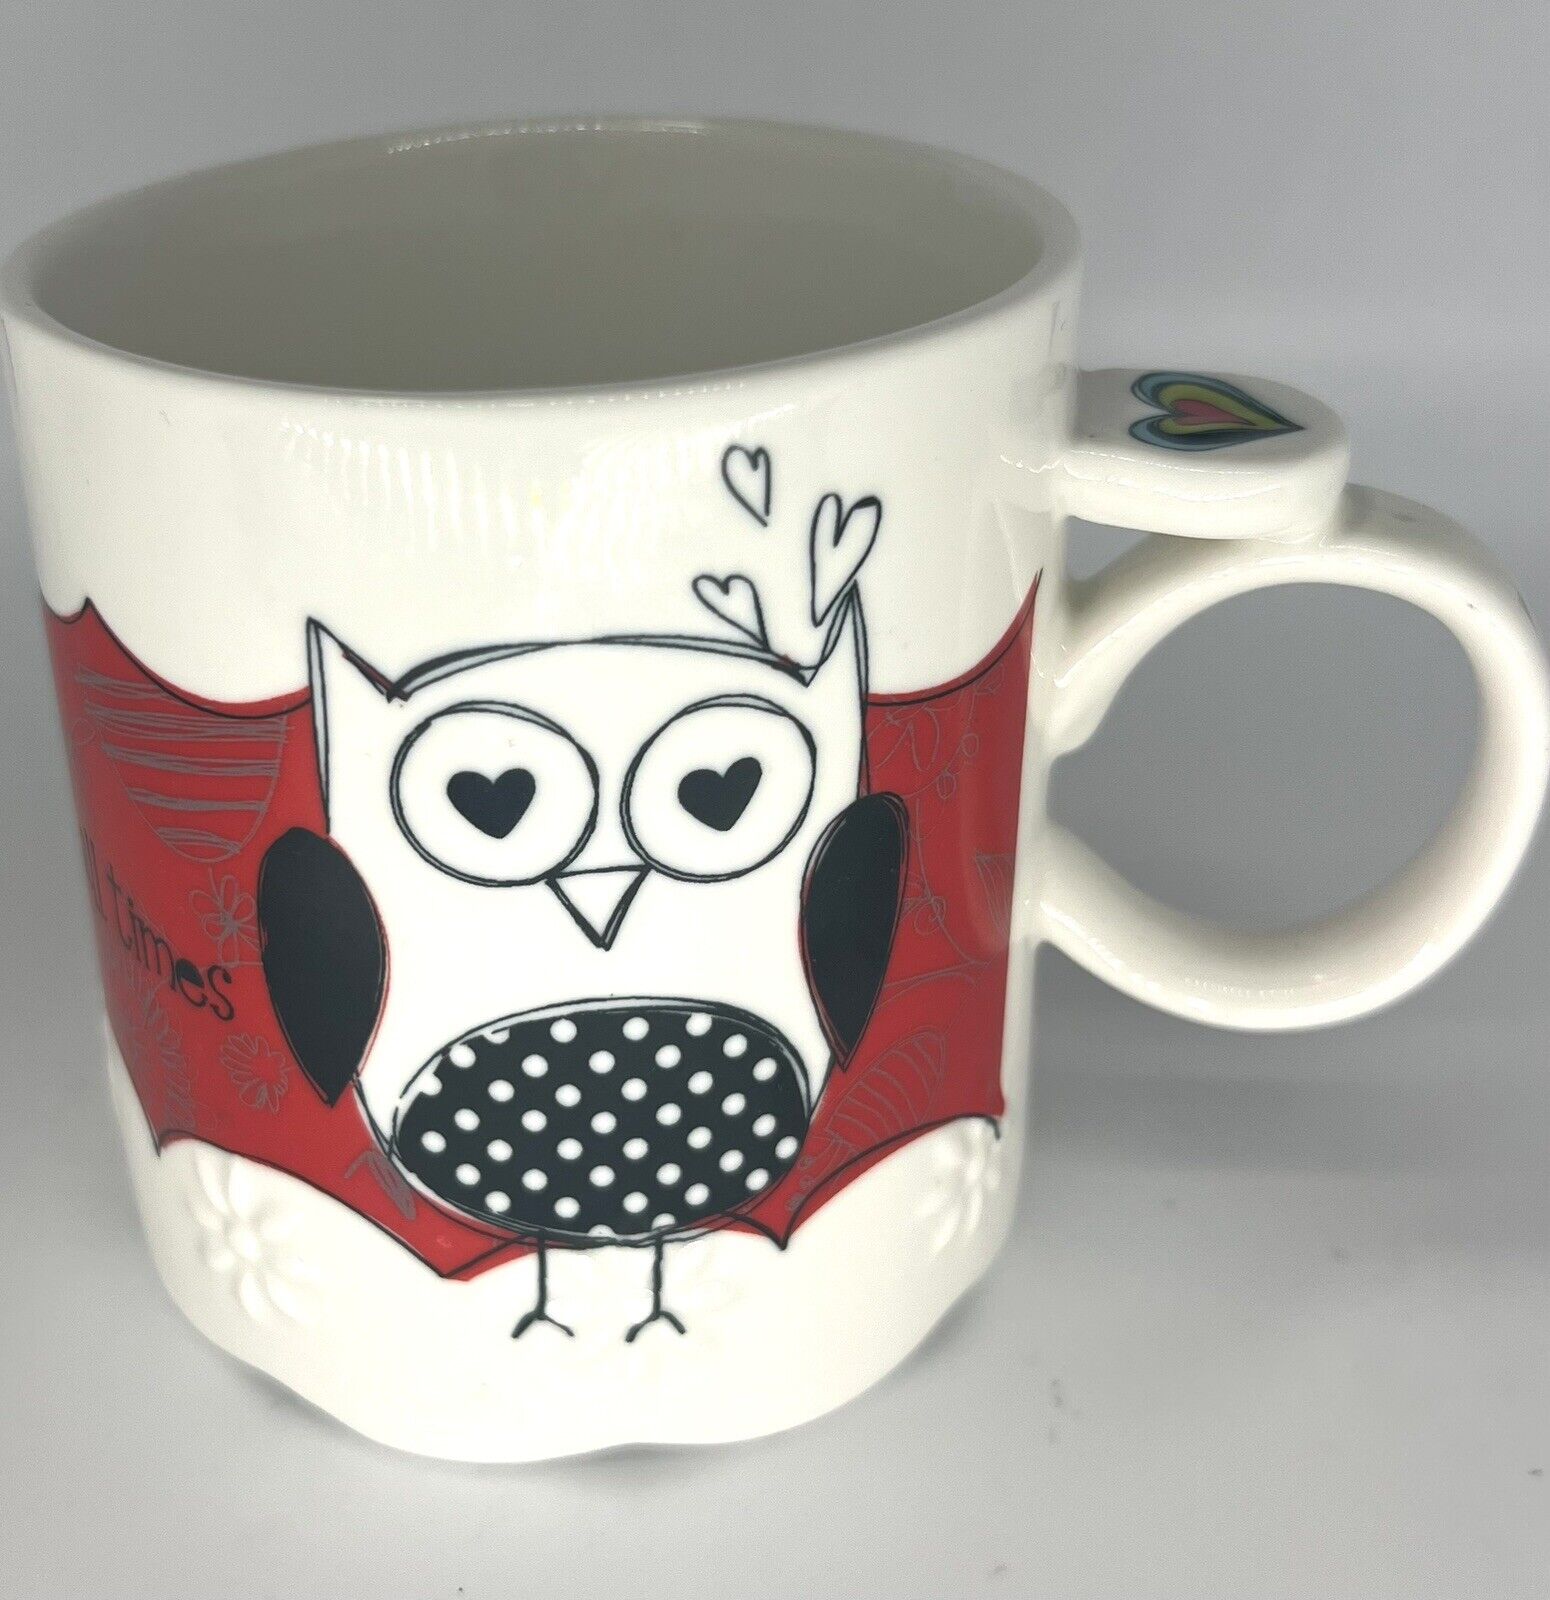 Love Owl Mug Amylee Weeks a Friend Loves at All Times 2013 Ceramic Cup 12 oz